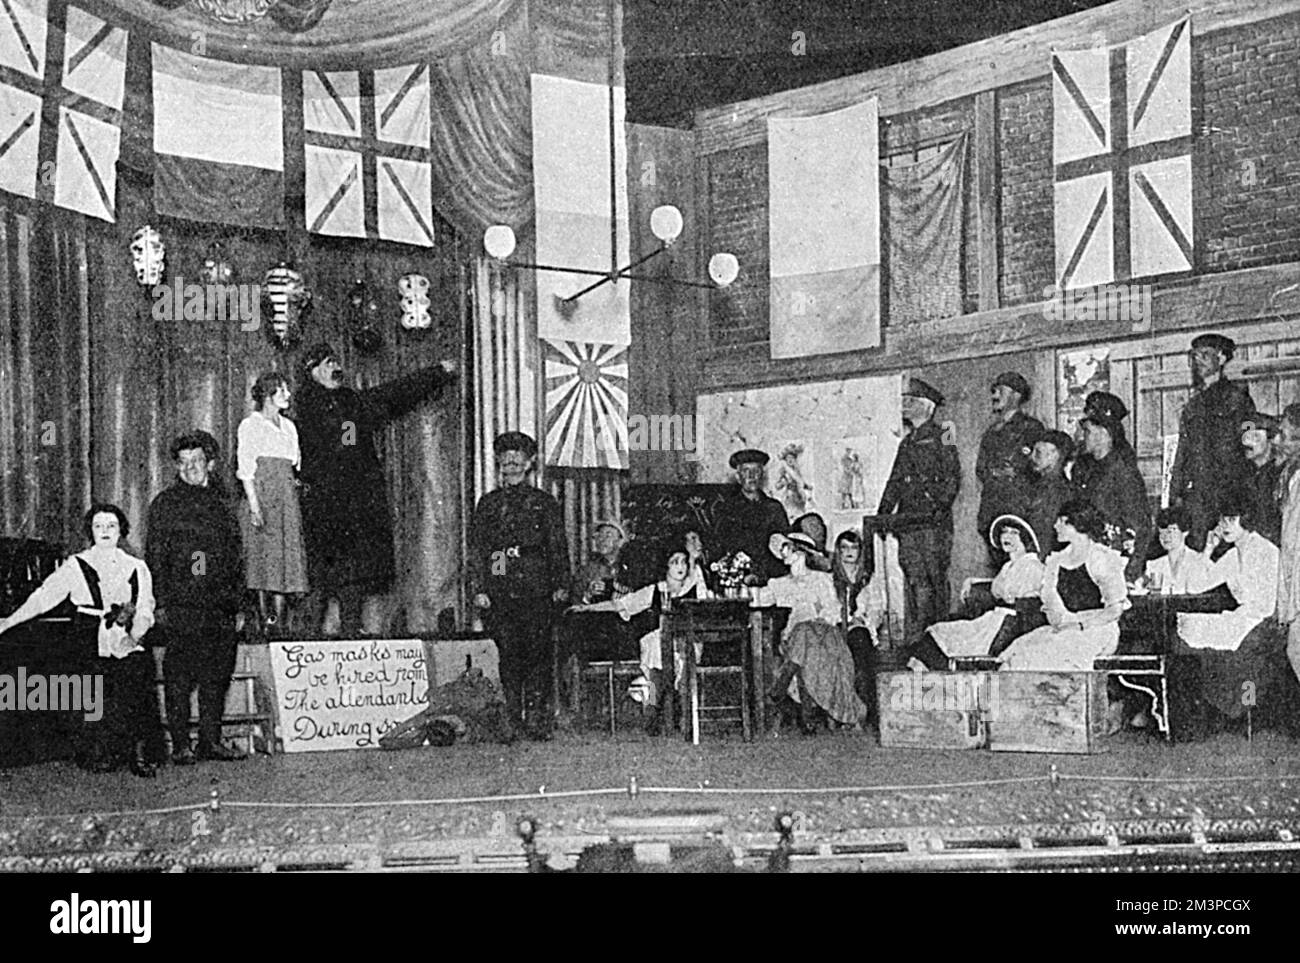 A scene from the play 'The Better 'Ole', co-written by Bruce Bairnsfather and featuring his popular character, Old Bill, which opened at the Oxford Music Hall on 4 August 1917 and ran for over 800 performances. Here, Old Bill is singing 'If you were the only girl in the world' and is interrupted by the entrance of his colonel     Date: August 1917 Stock Photo